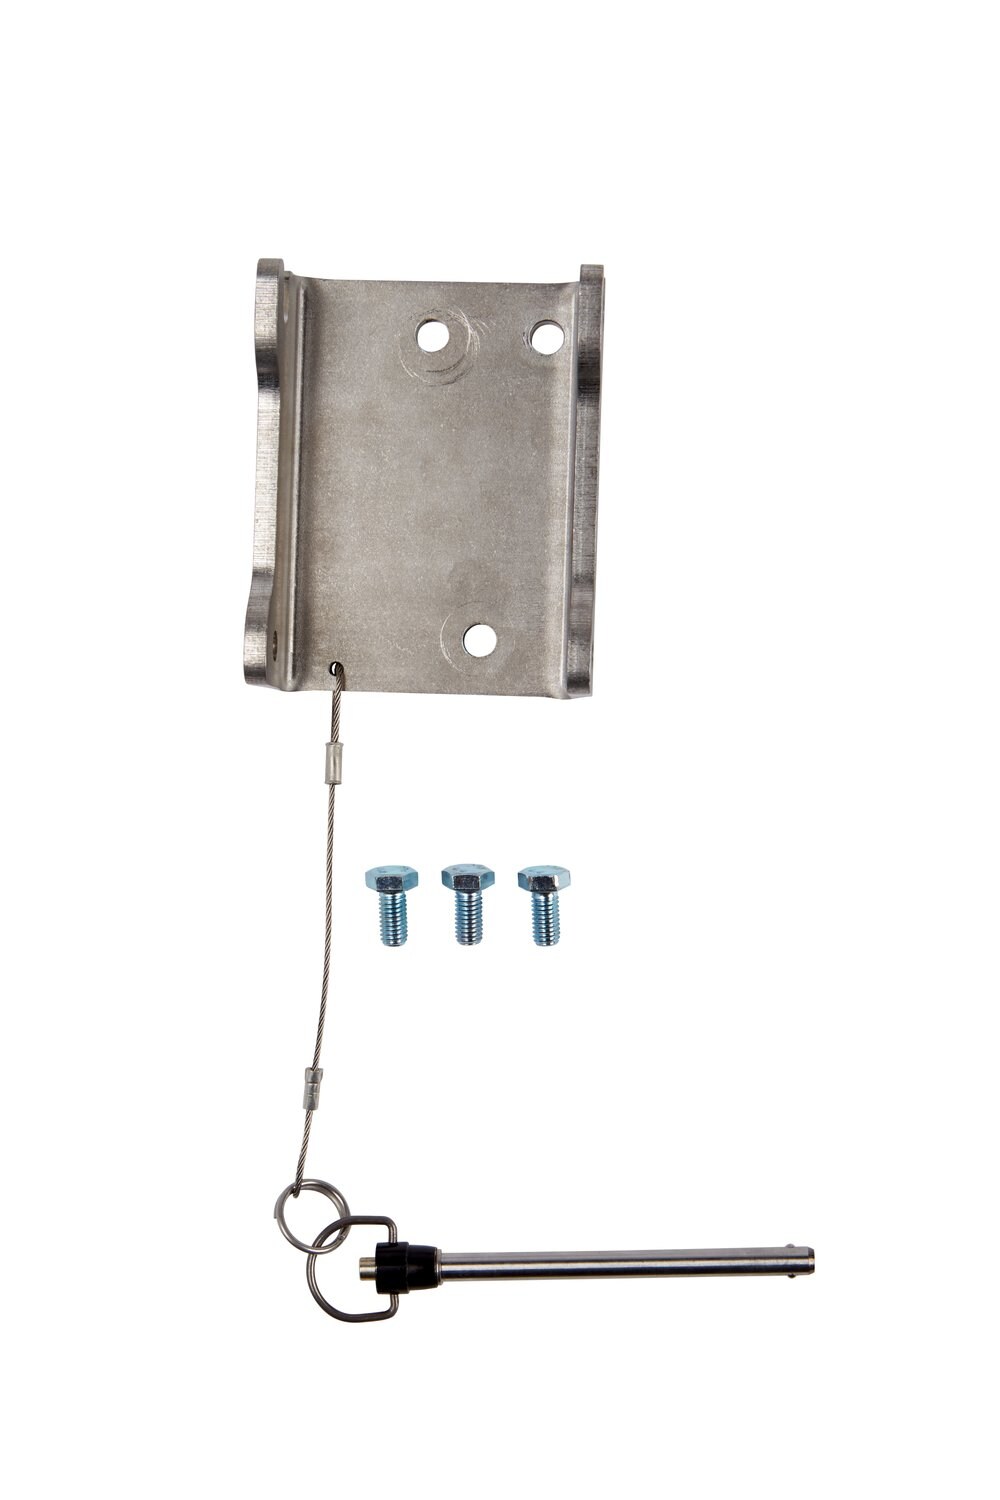 7100309559 - 3M Protecta Mounting Bracket For 3-Way Retrieval Self-Retracting Lifeline 3590499, SRL Side Only